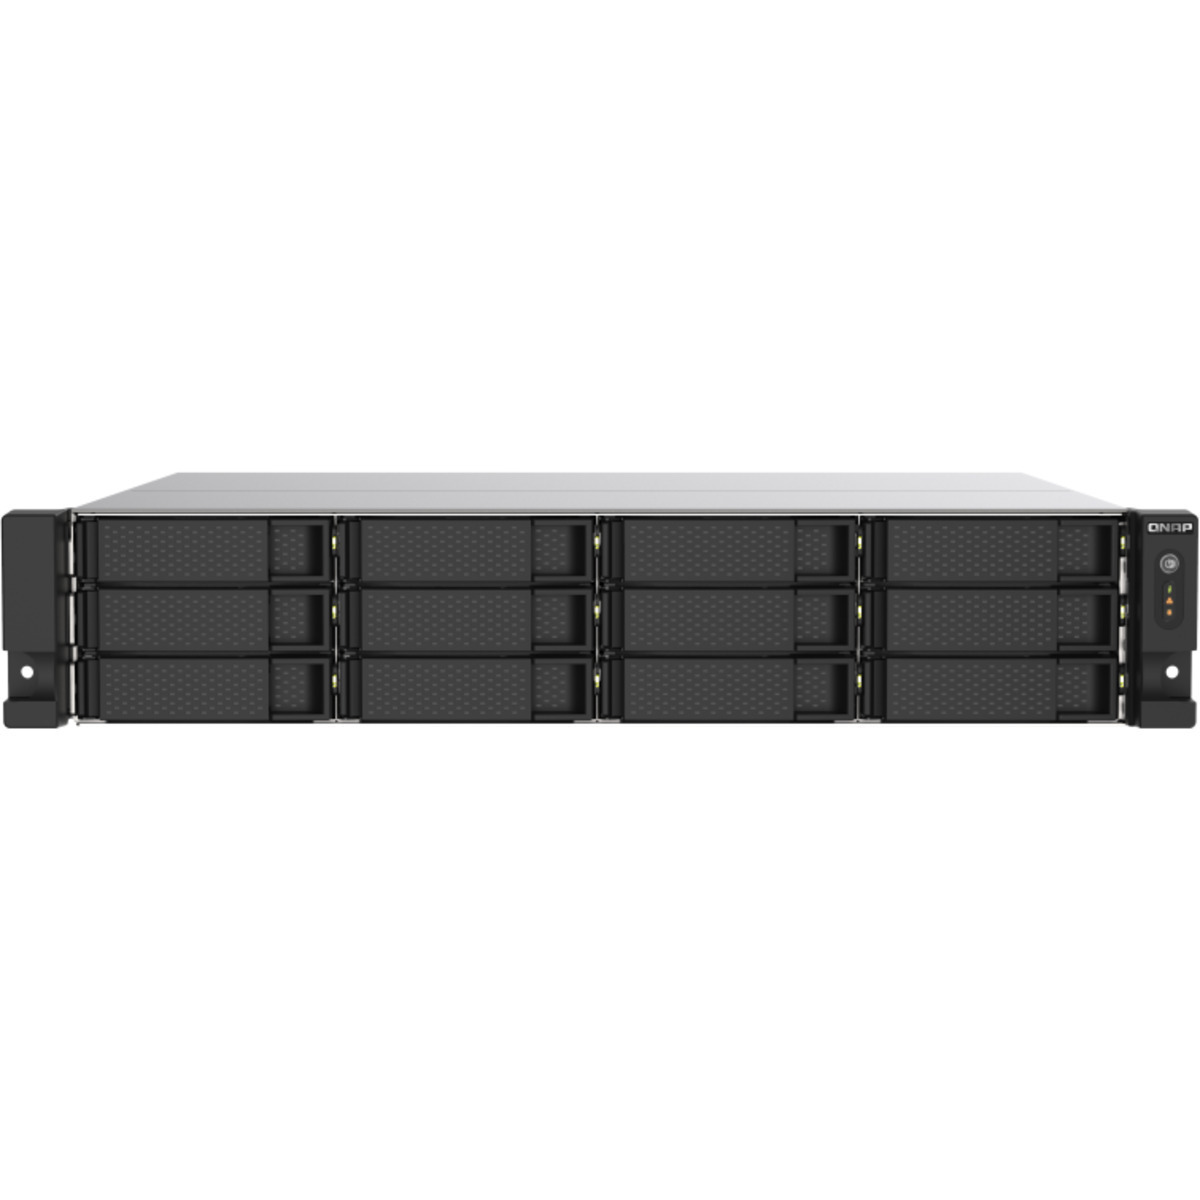 QNAP TS-1273AU-RP 40tb 12-Bay RackMount Multimedia / Power User / Business NAS - Network Attached Storage Device 10x4tb Seagate IronWolf ST4000VN006 3.5 5400rpm SATA 6Gb/s HDD NAS Class Drives Installed - Burn-In Tested - FREE RAM UPGRADE TS-1273AU-RP